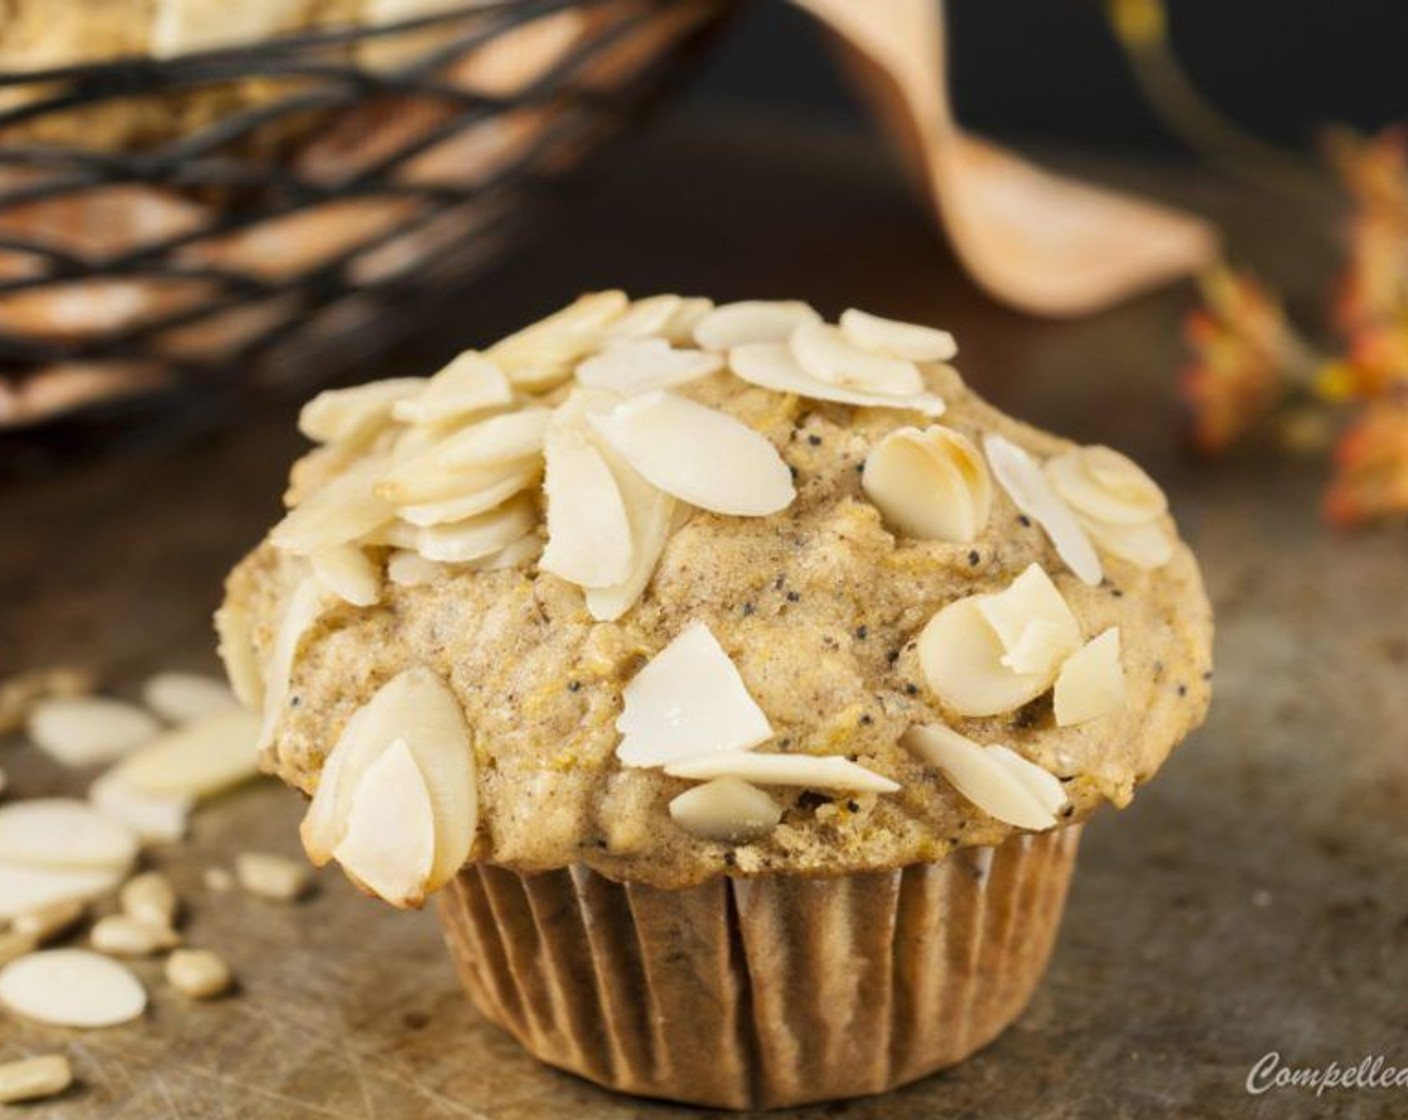 Pumpkin Seed and Nut Muffins